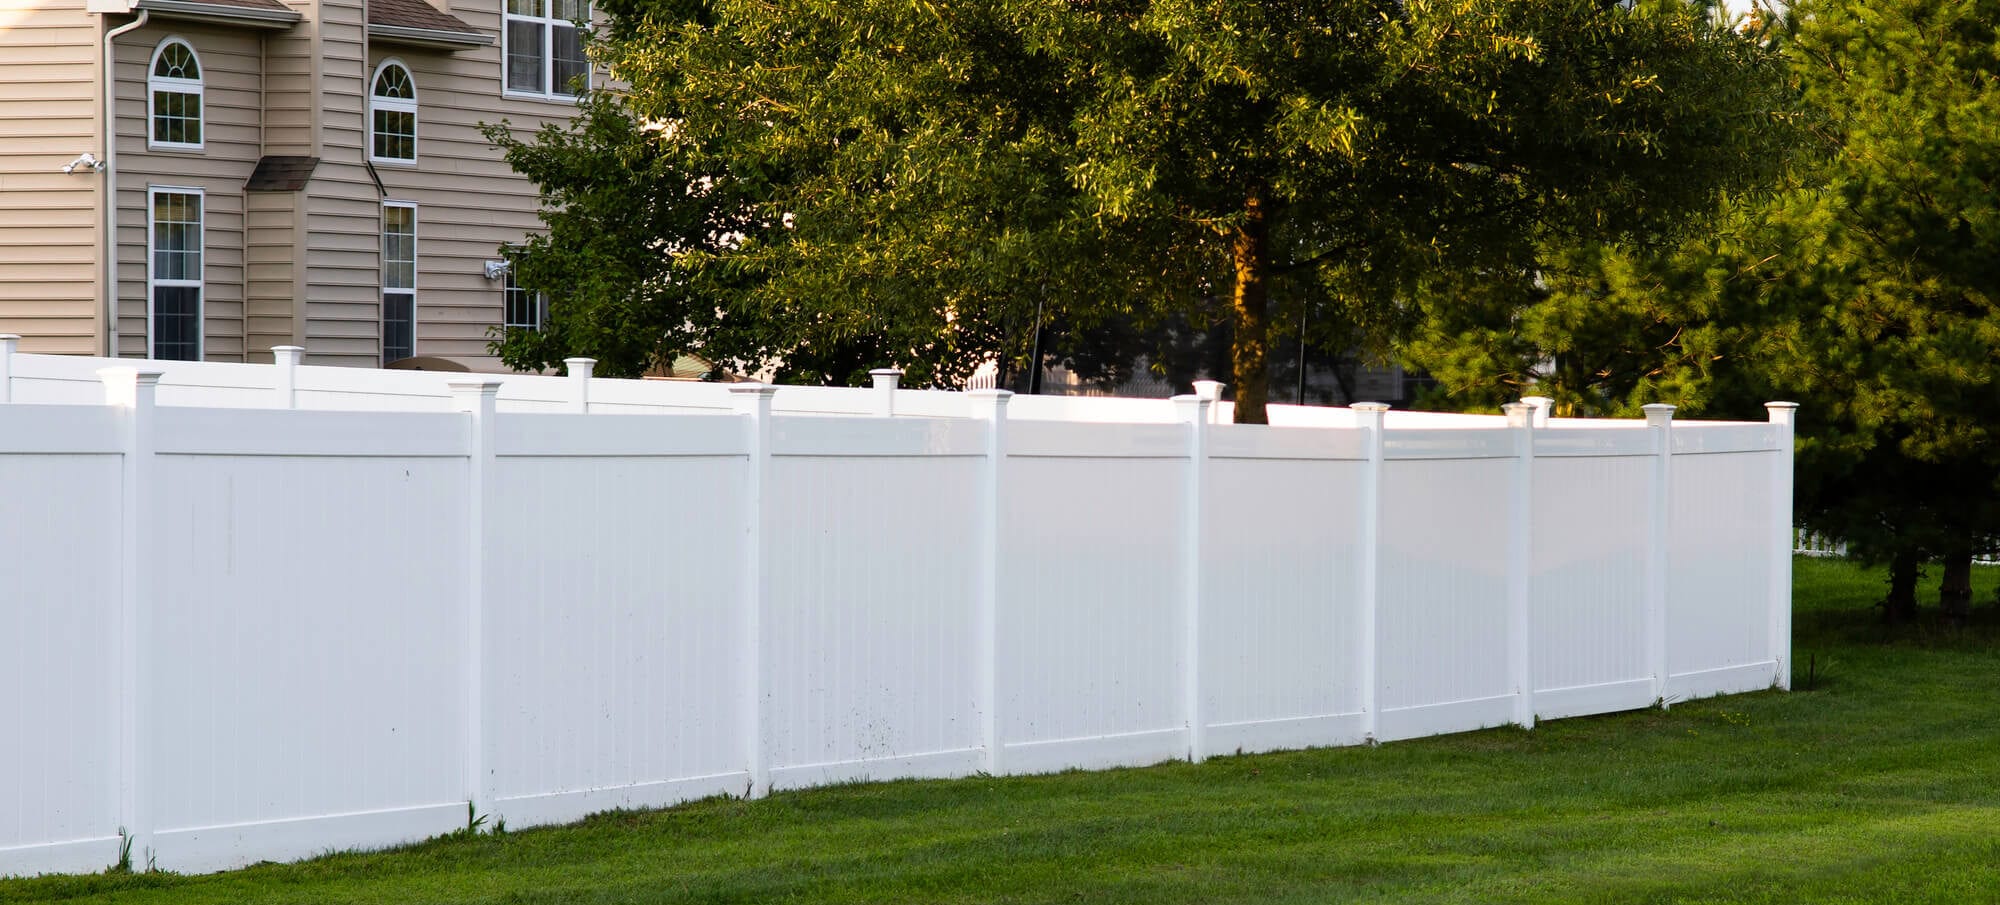 The 5 Most Popular Reasons to Install a Vinyl Privacy Fence